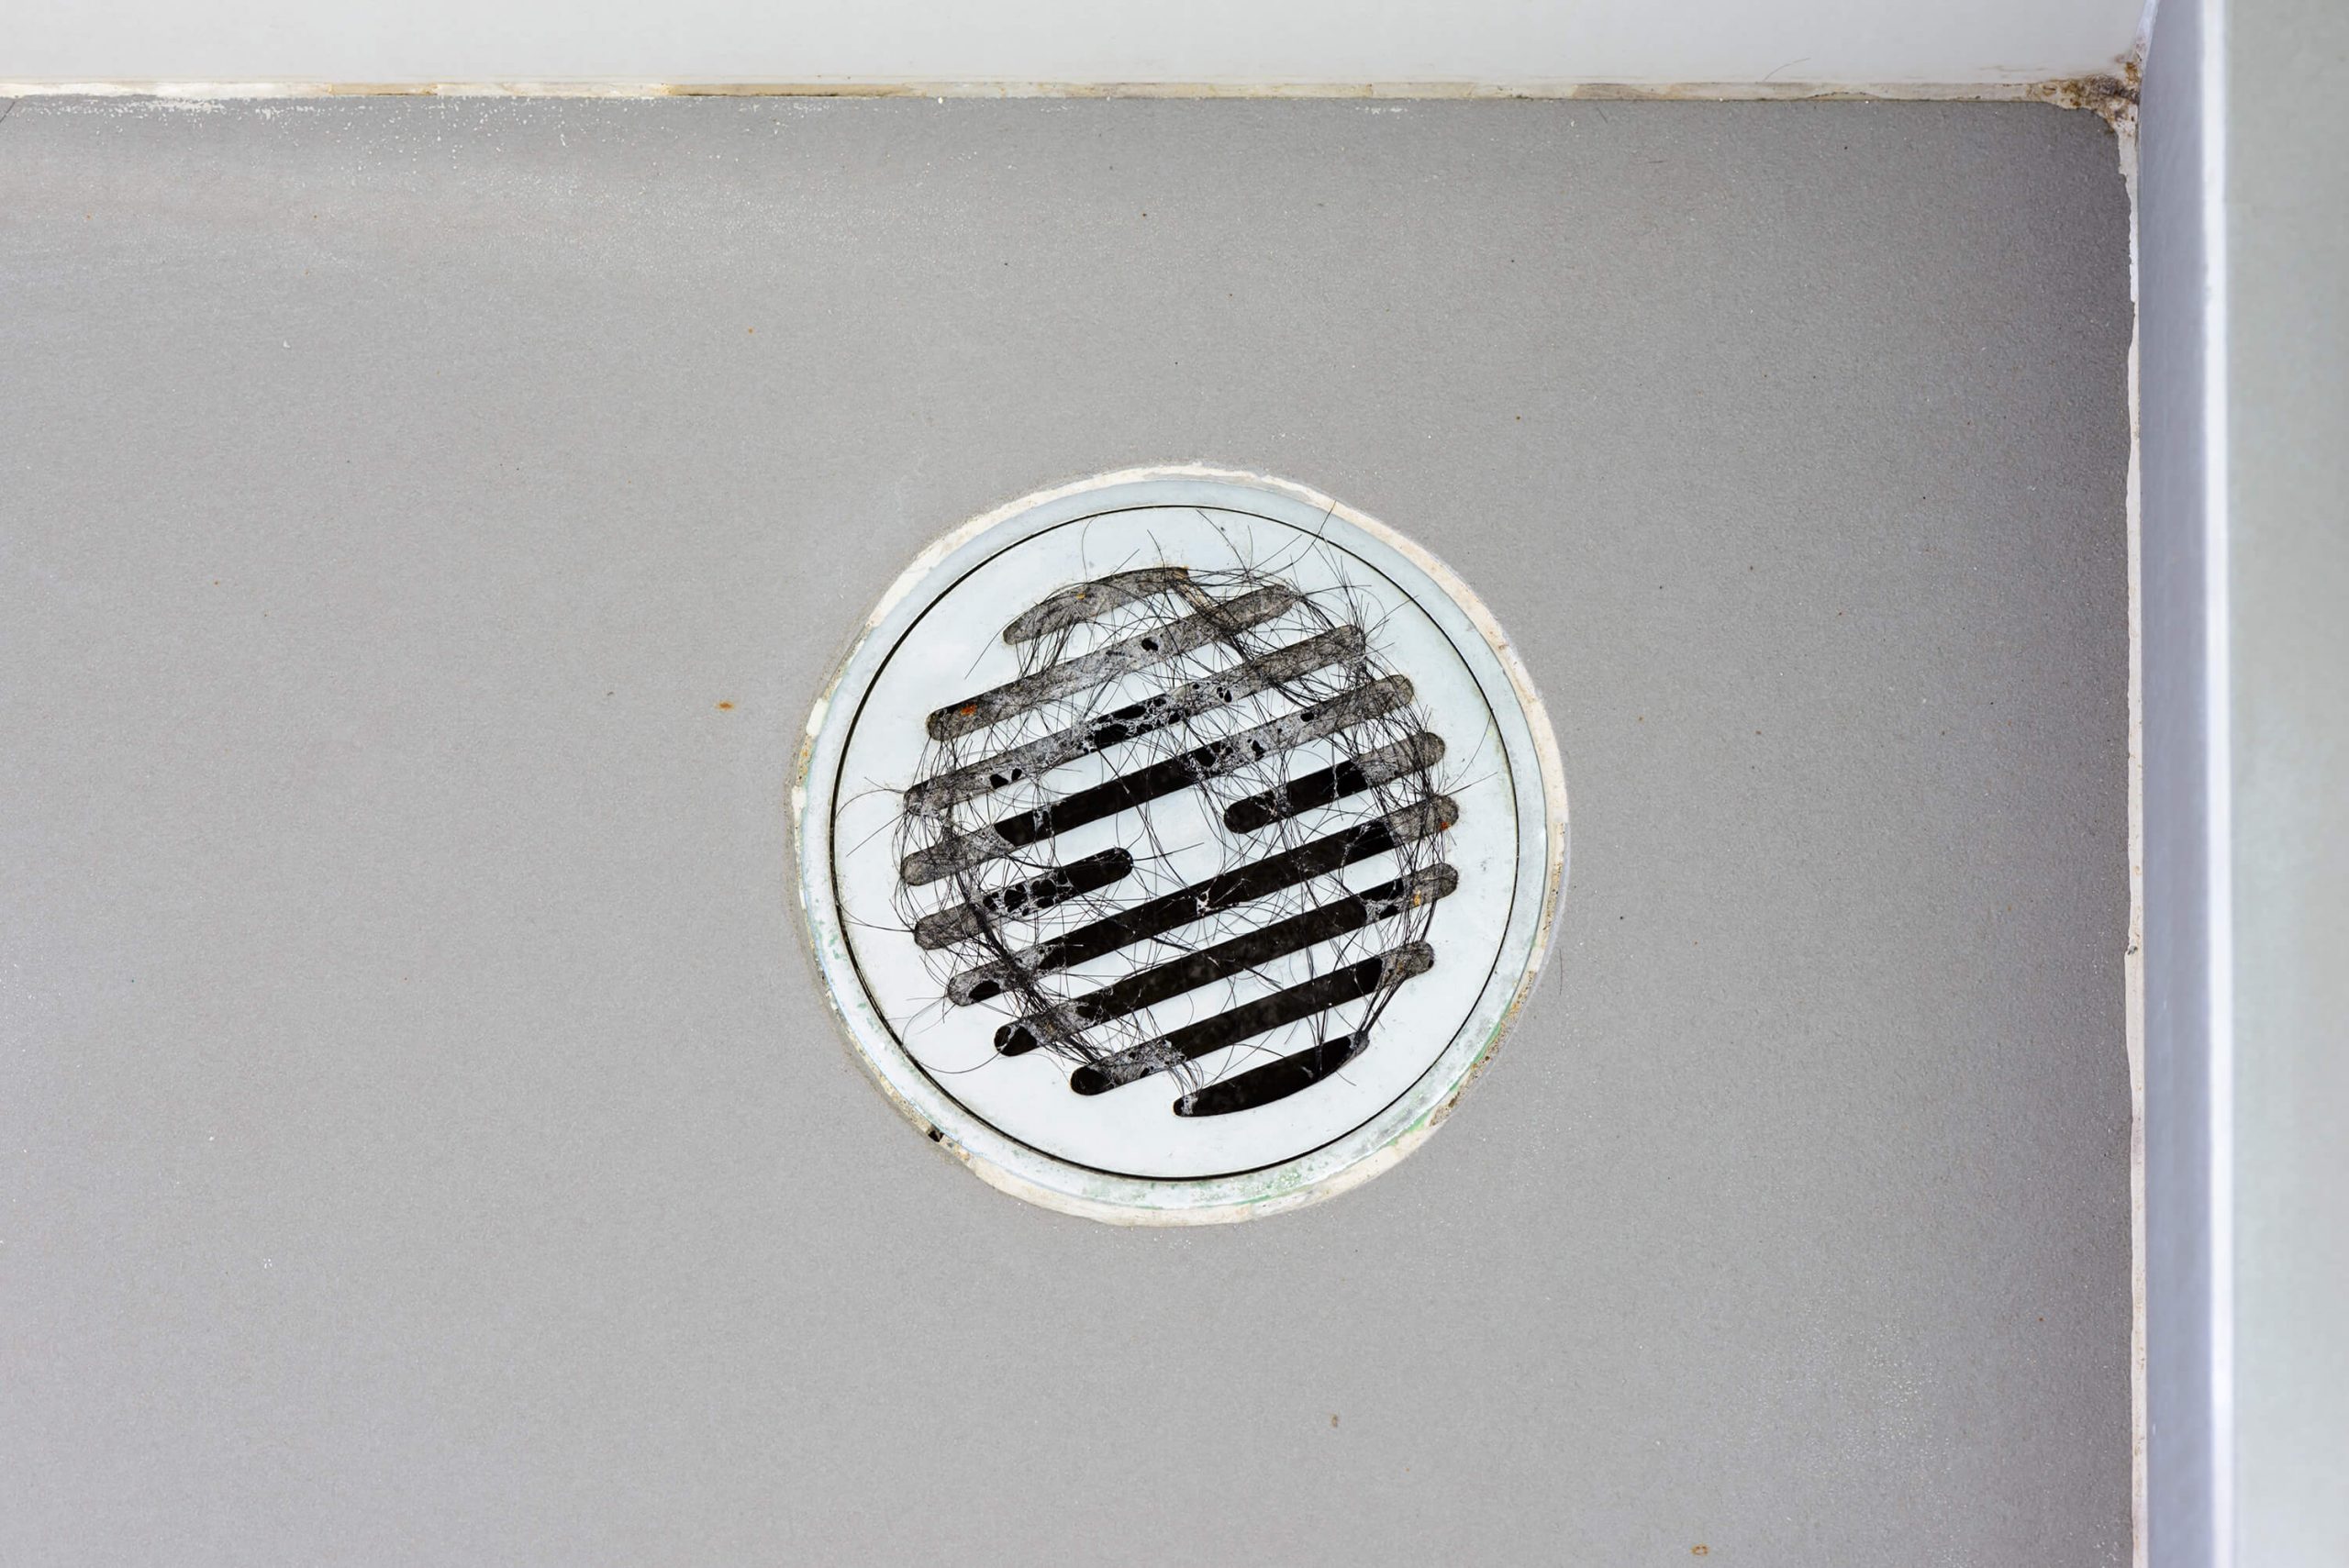 How to Unclog a Shower Drain